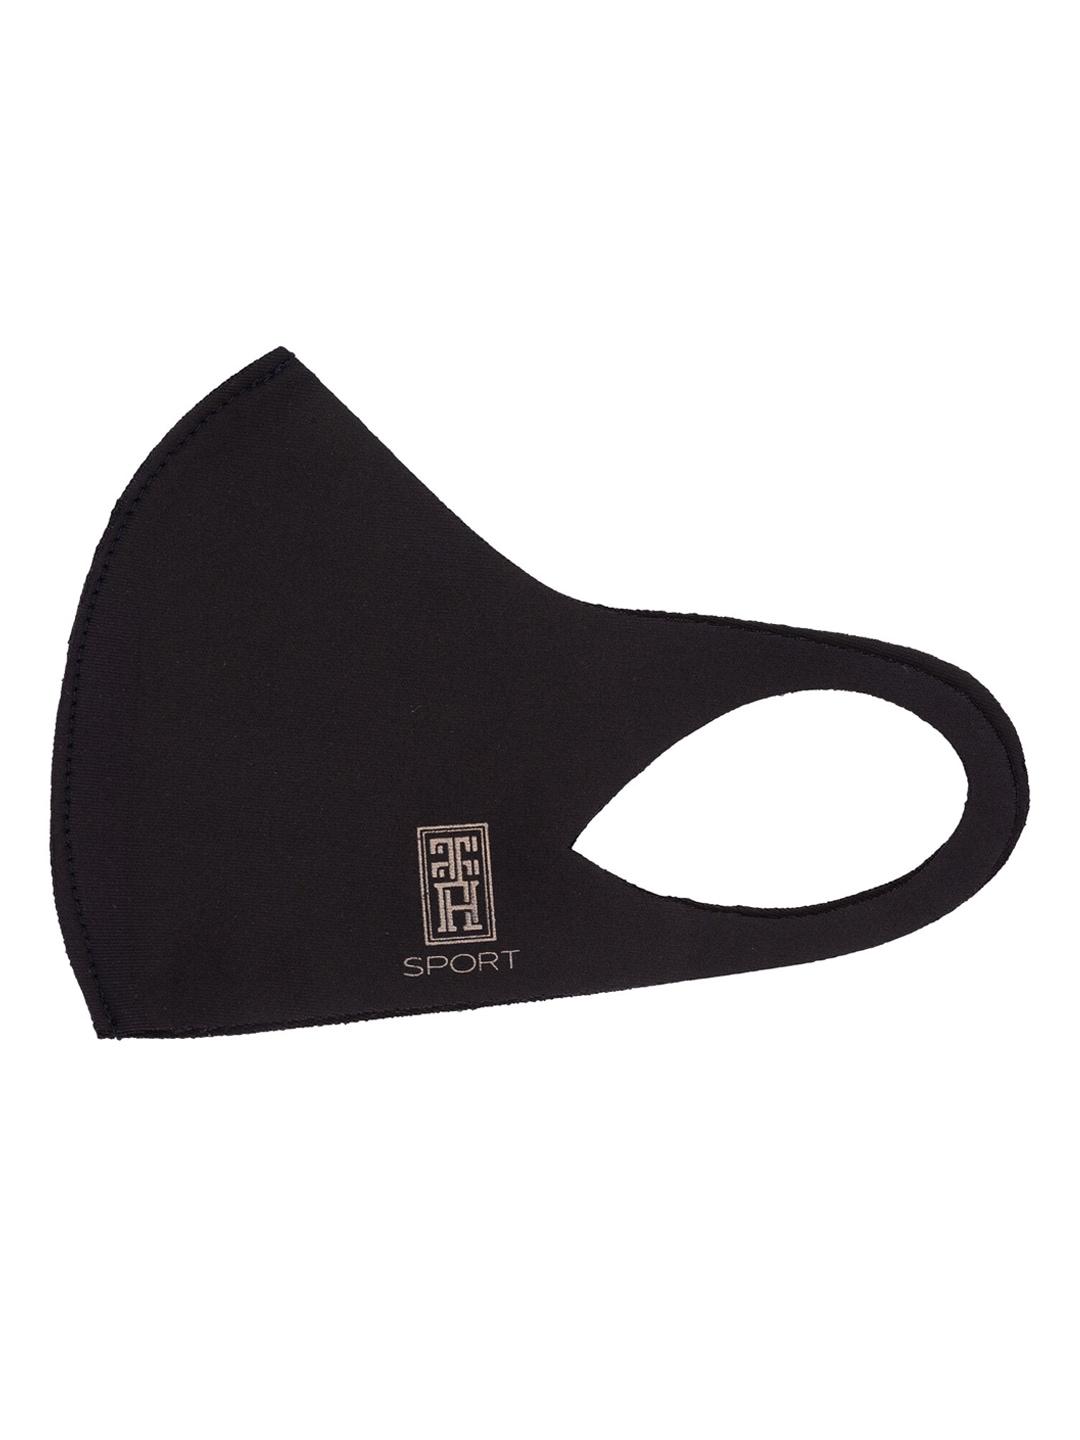 the-tie-hub-unisex-kids-black-solid-1-ply-reusable-neo-sports-cloth-mask